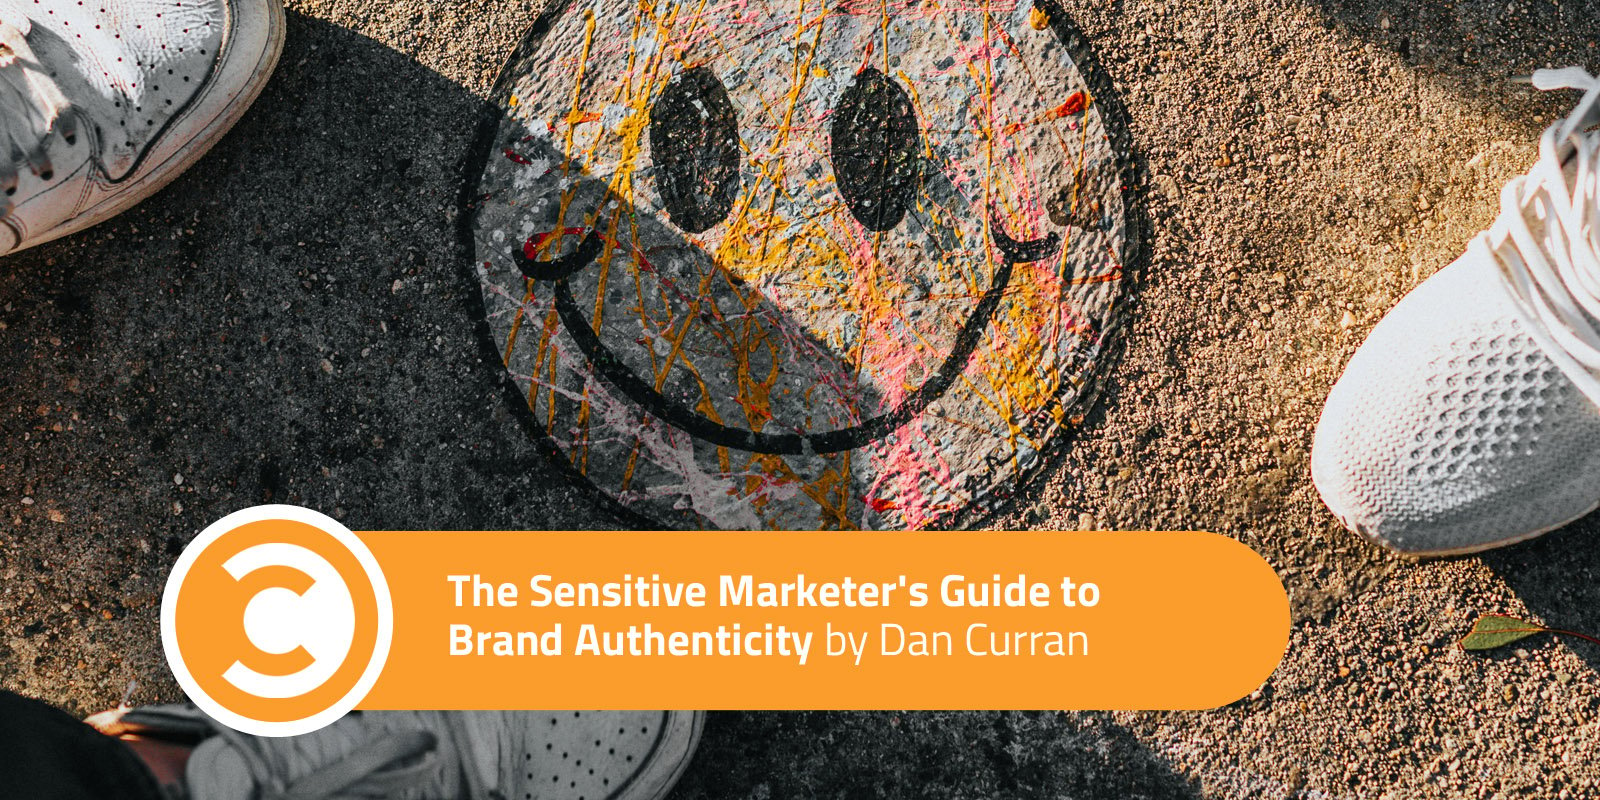 The Sensitive Marketer's Guide to Brand Authenticity